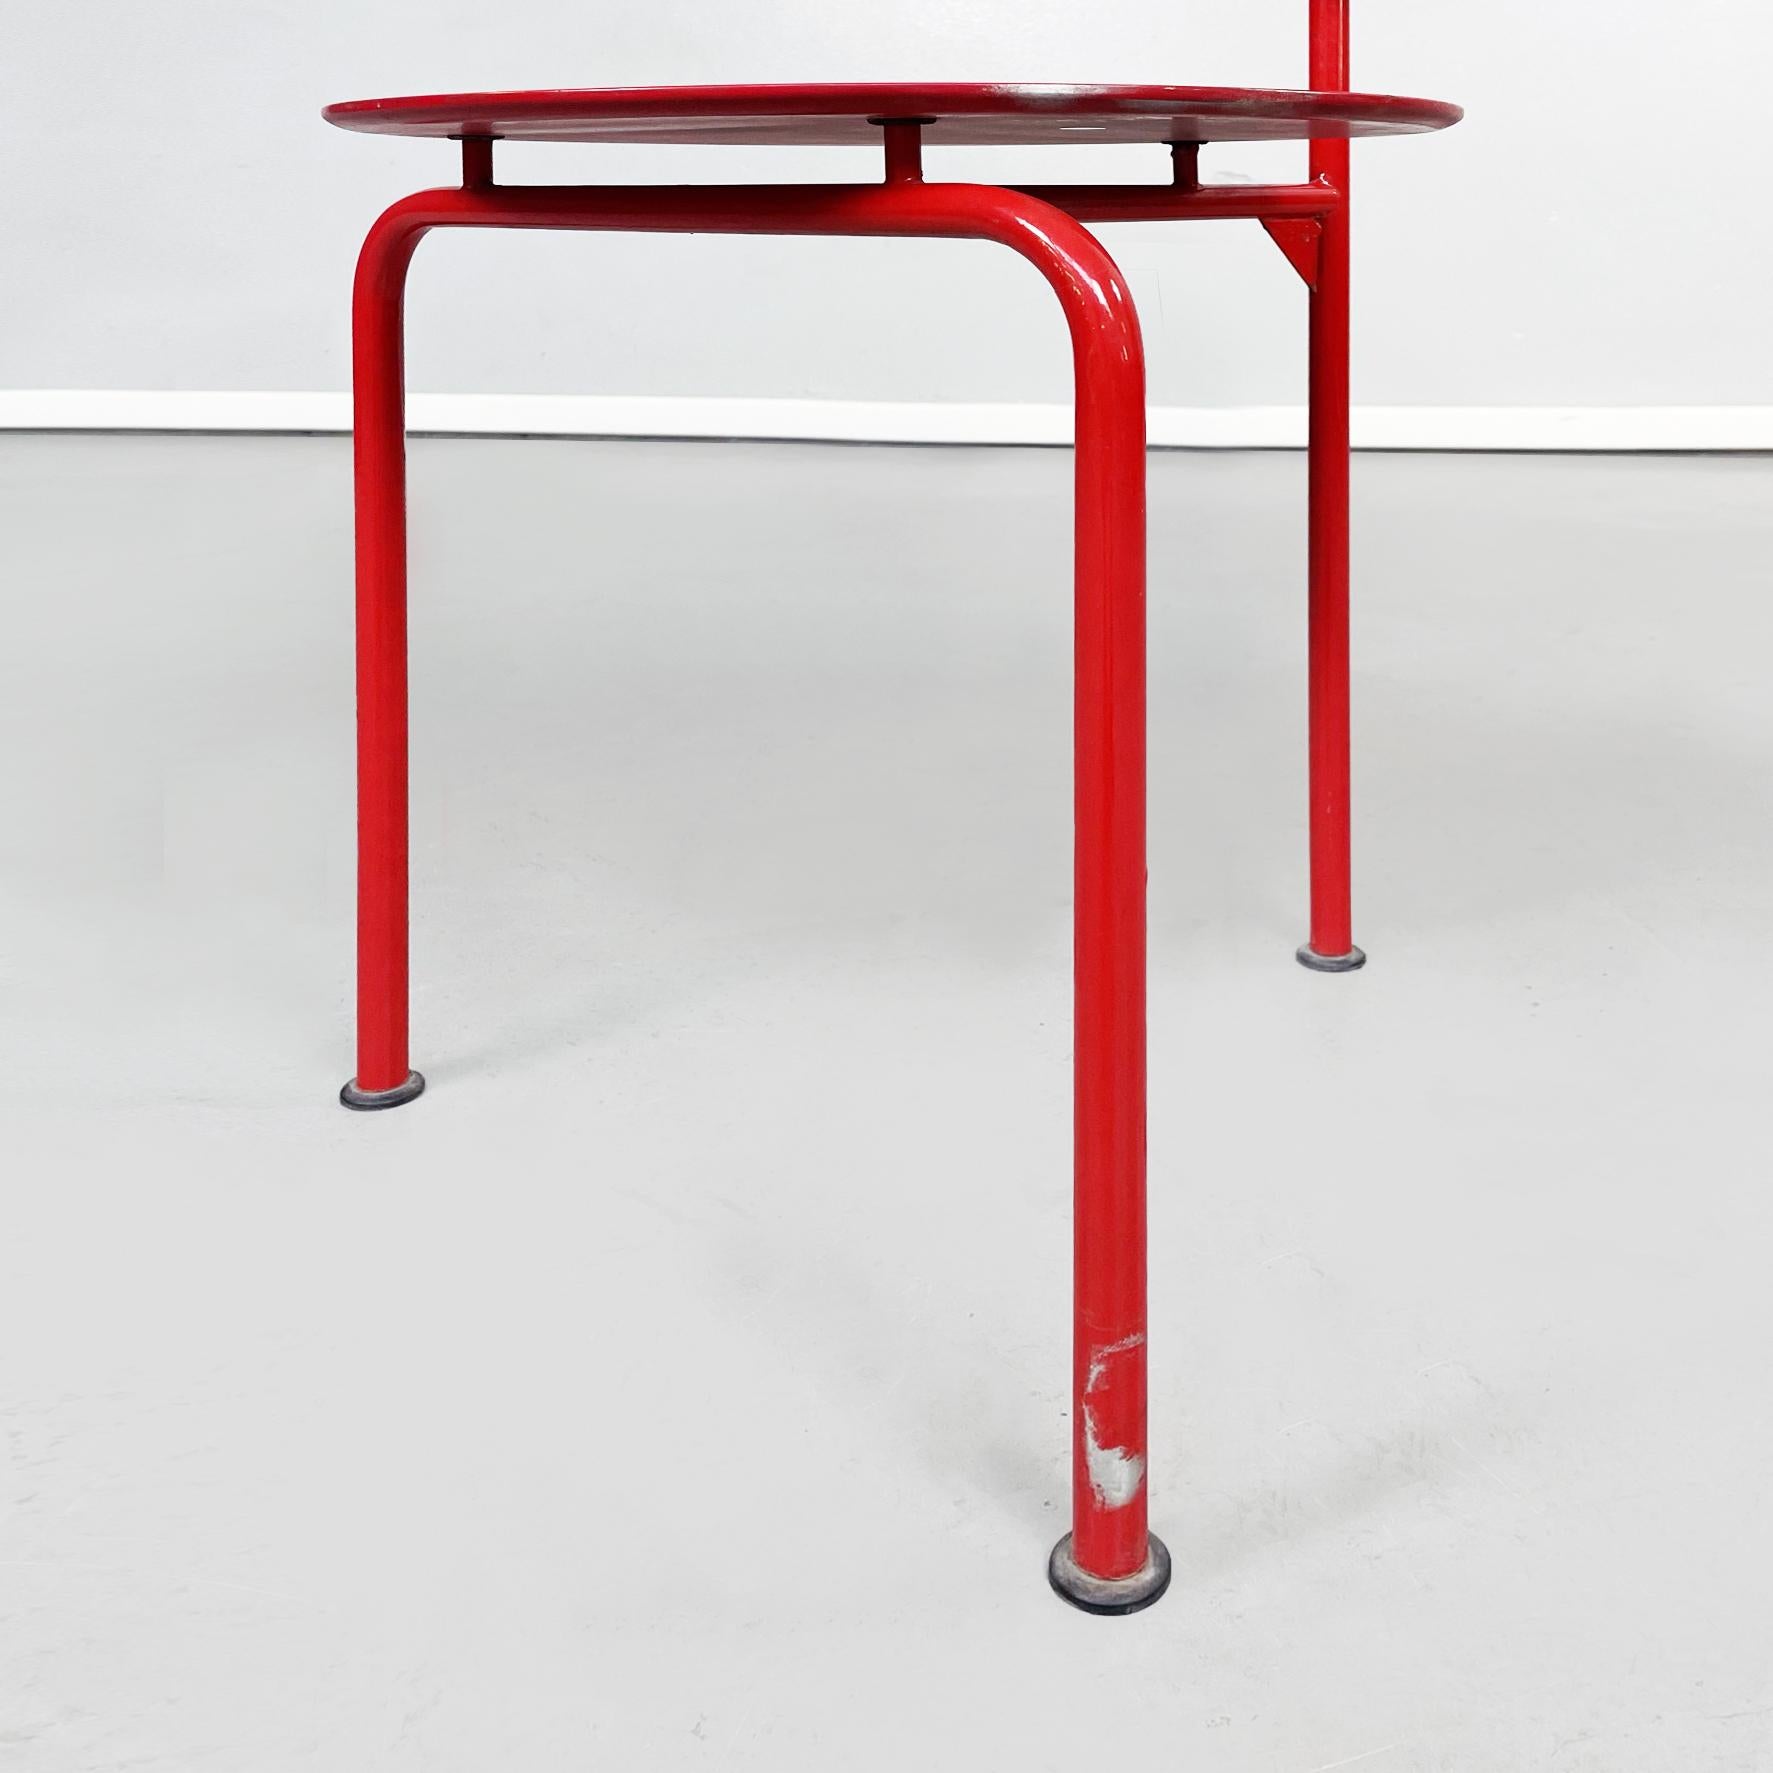 Italian Mid-Century Red Wood and Metal Alien Chair by Forcolini for Alias, 1980s For Sale 10